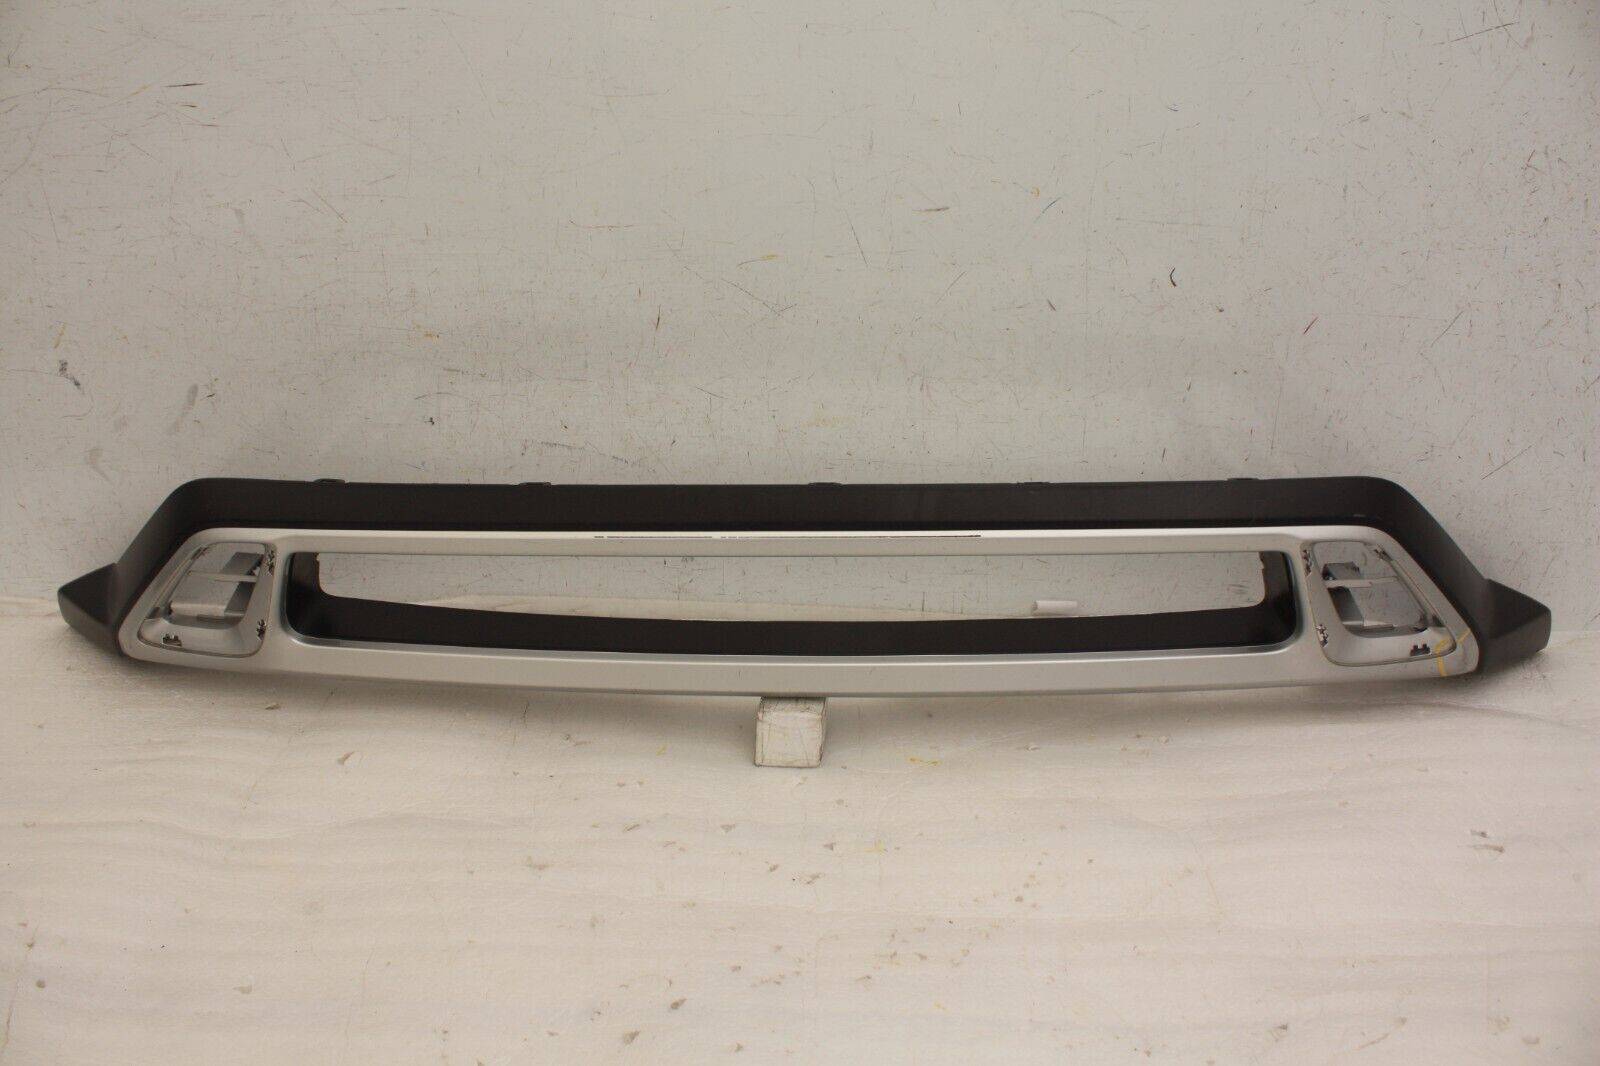 Mitsubishi-Outlander-Front-Bumper-Lower-Section-2018-TO-2021-6405A269-DAMAGED-176393343790